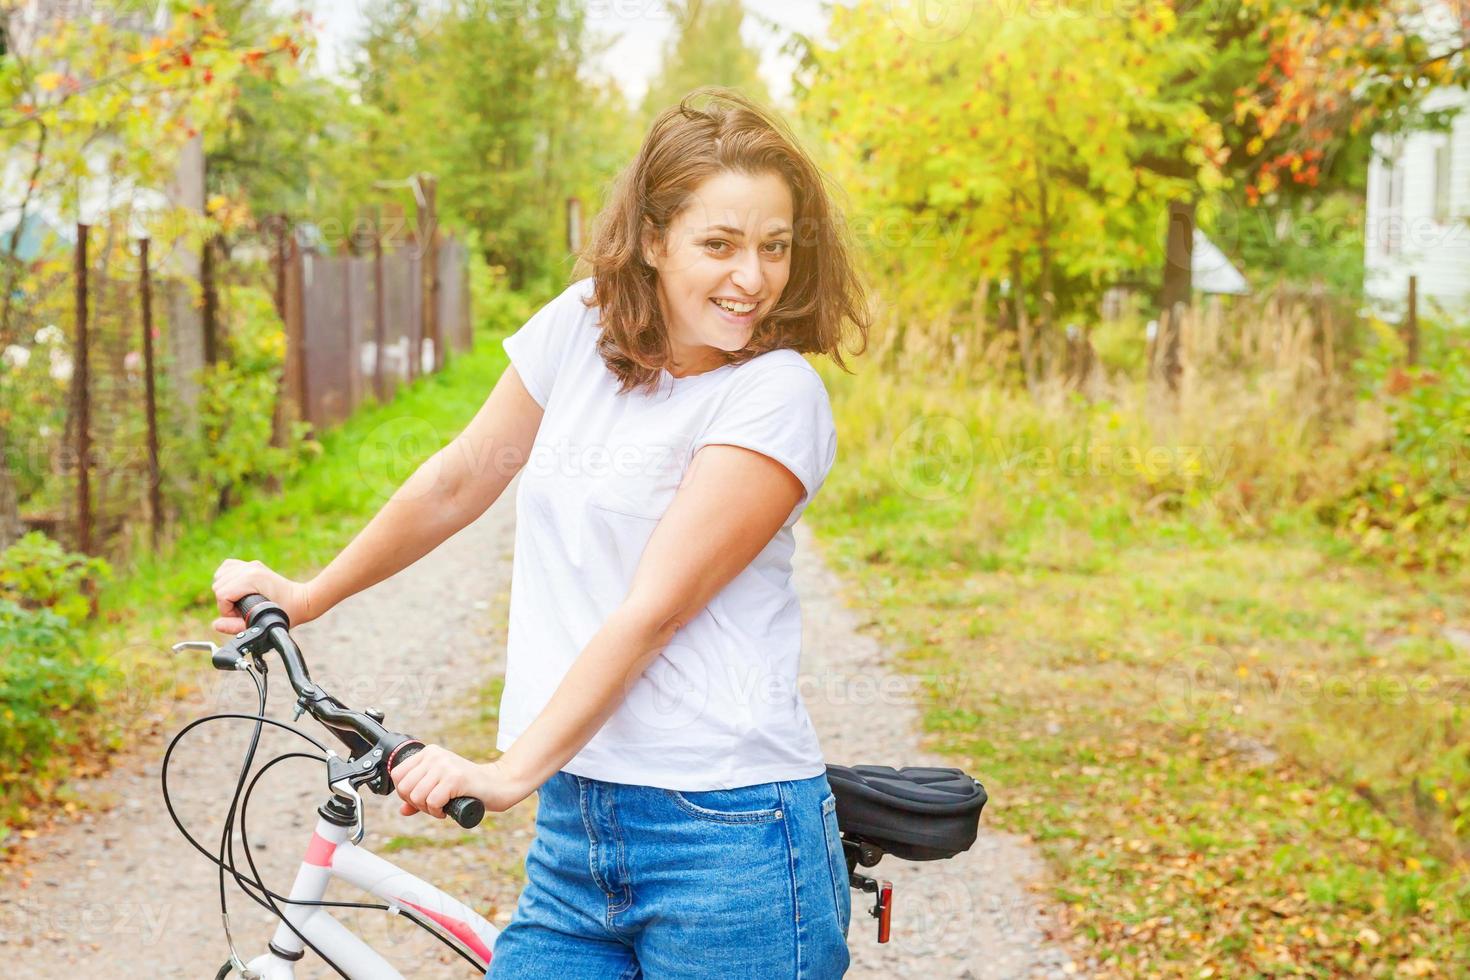 Young woman riding bicycle in summer city park outdoors. Active people. Hipster girl relax and rider bike. Cycling to work at summer day. Bicycle and ecology lifestyle concept. photo